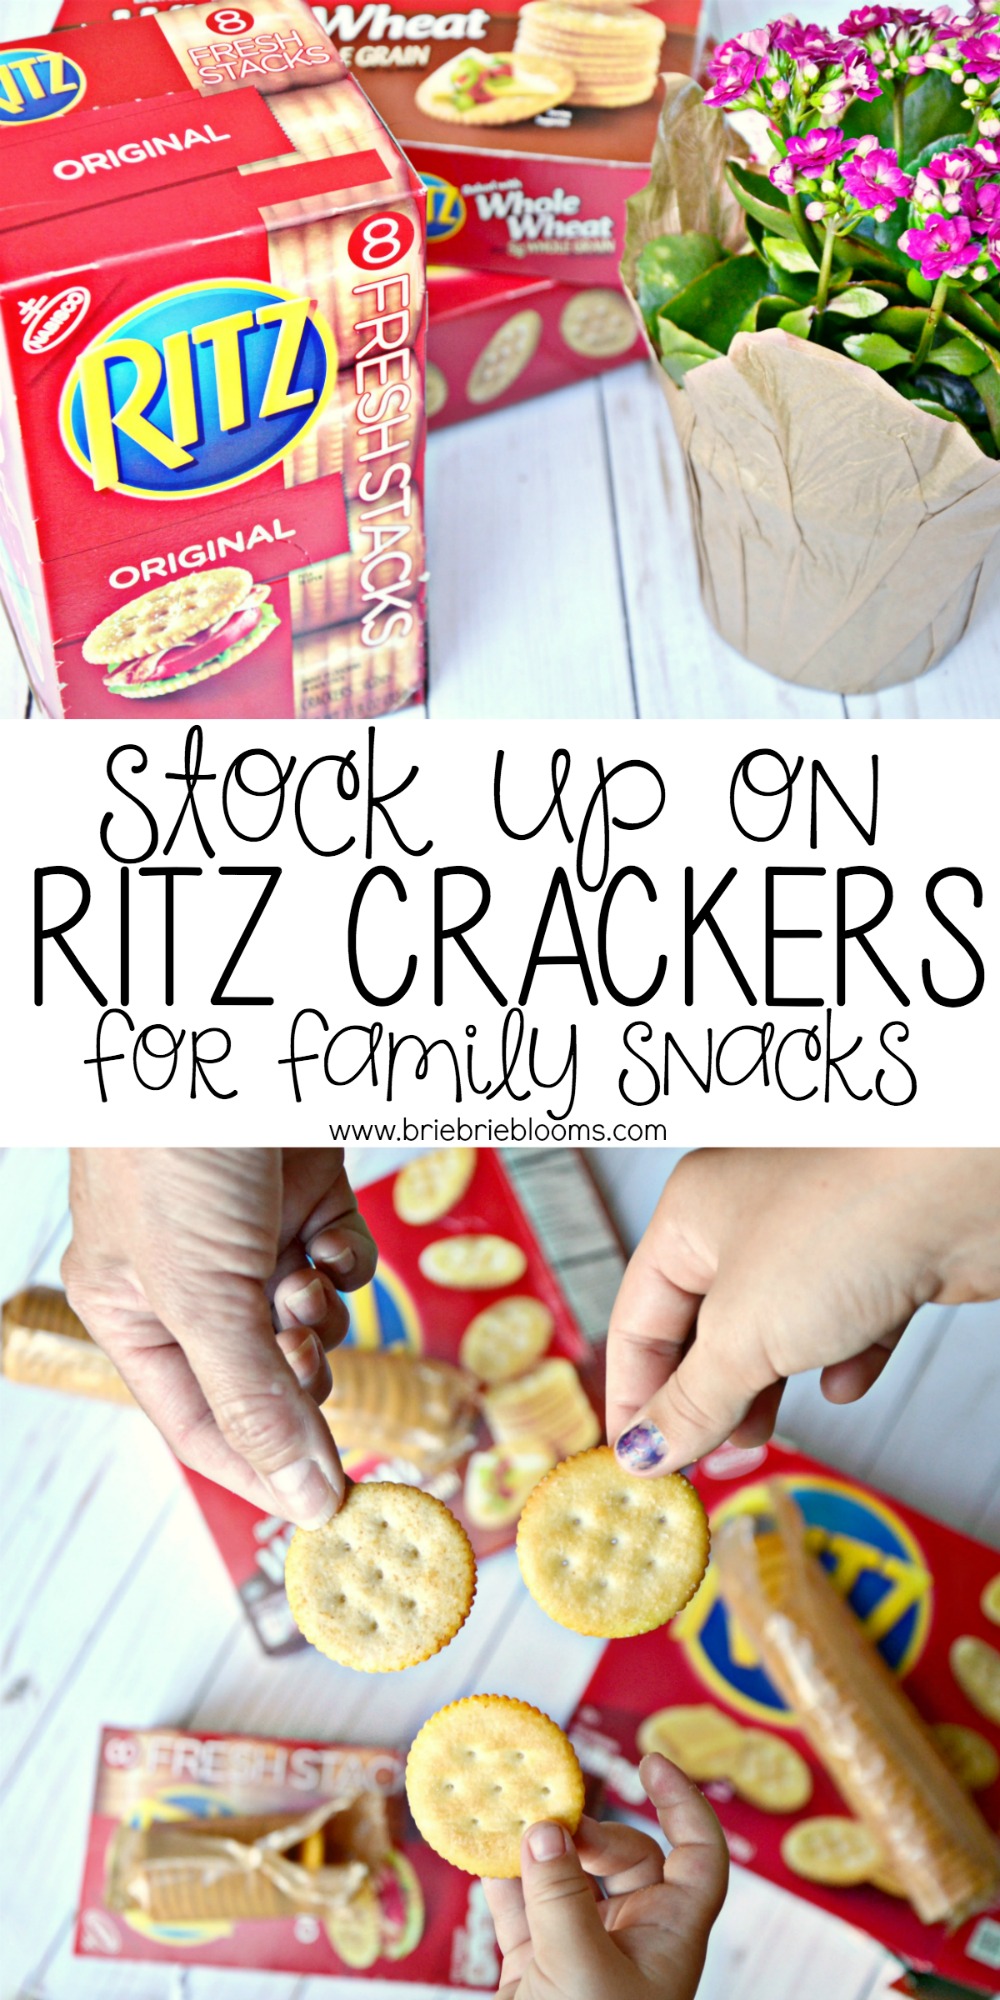 Stock up on RITZ Crackers for family snacks at Walmart and save with the Ibotta app.